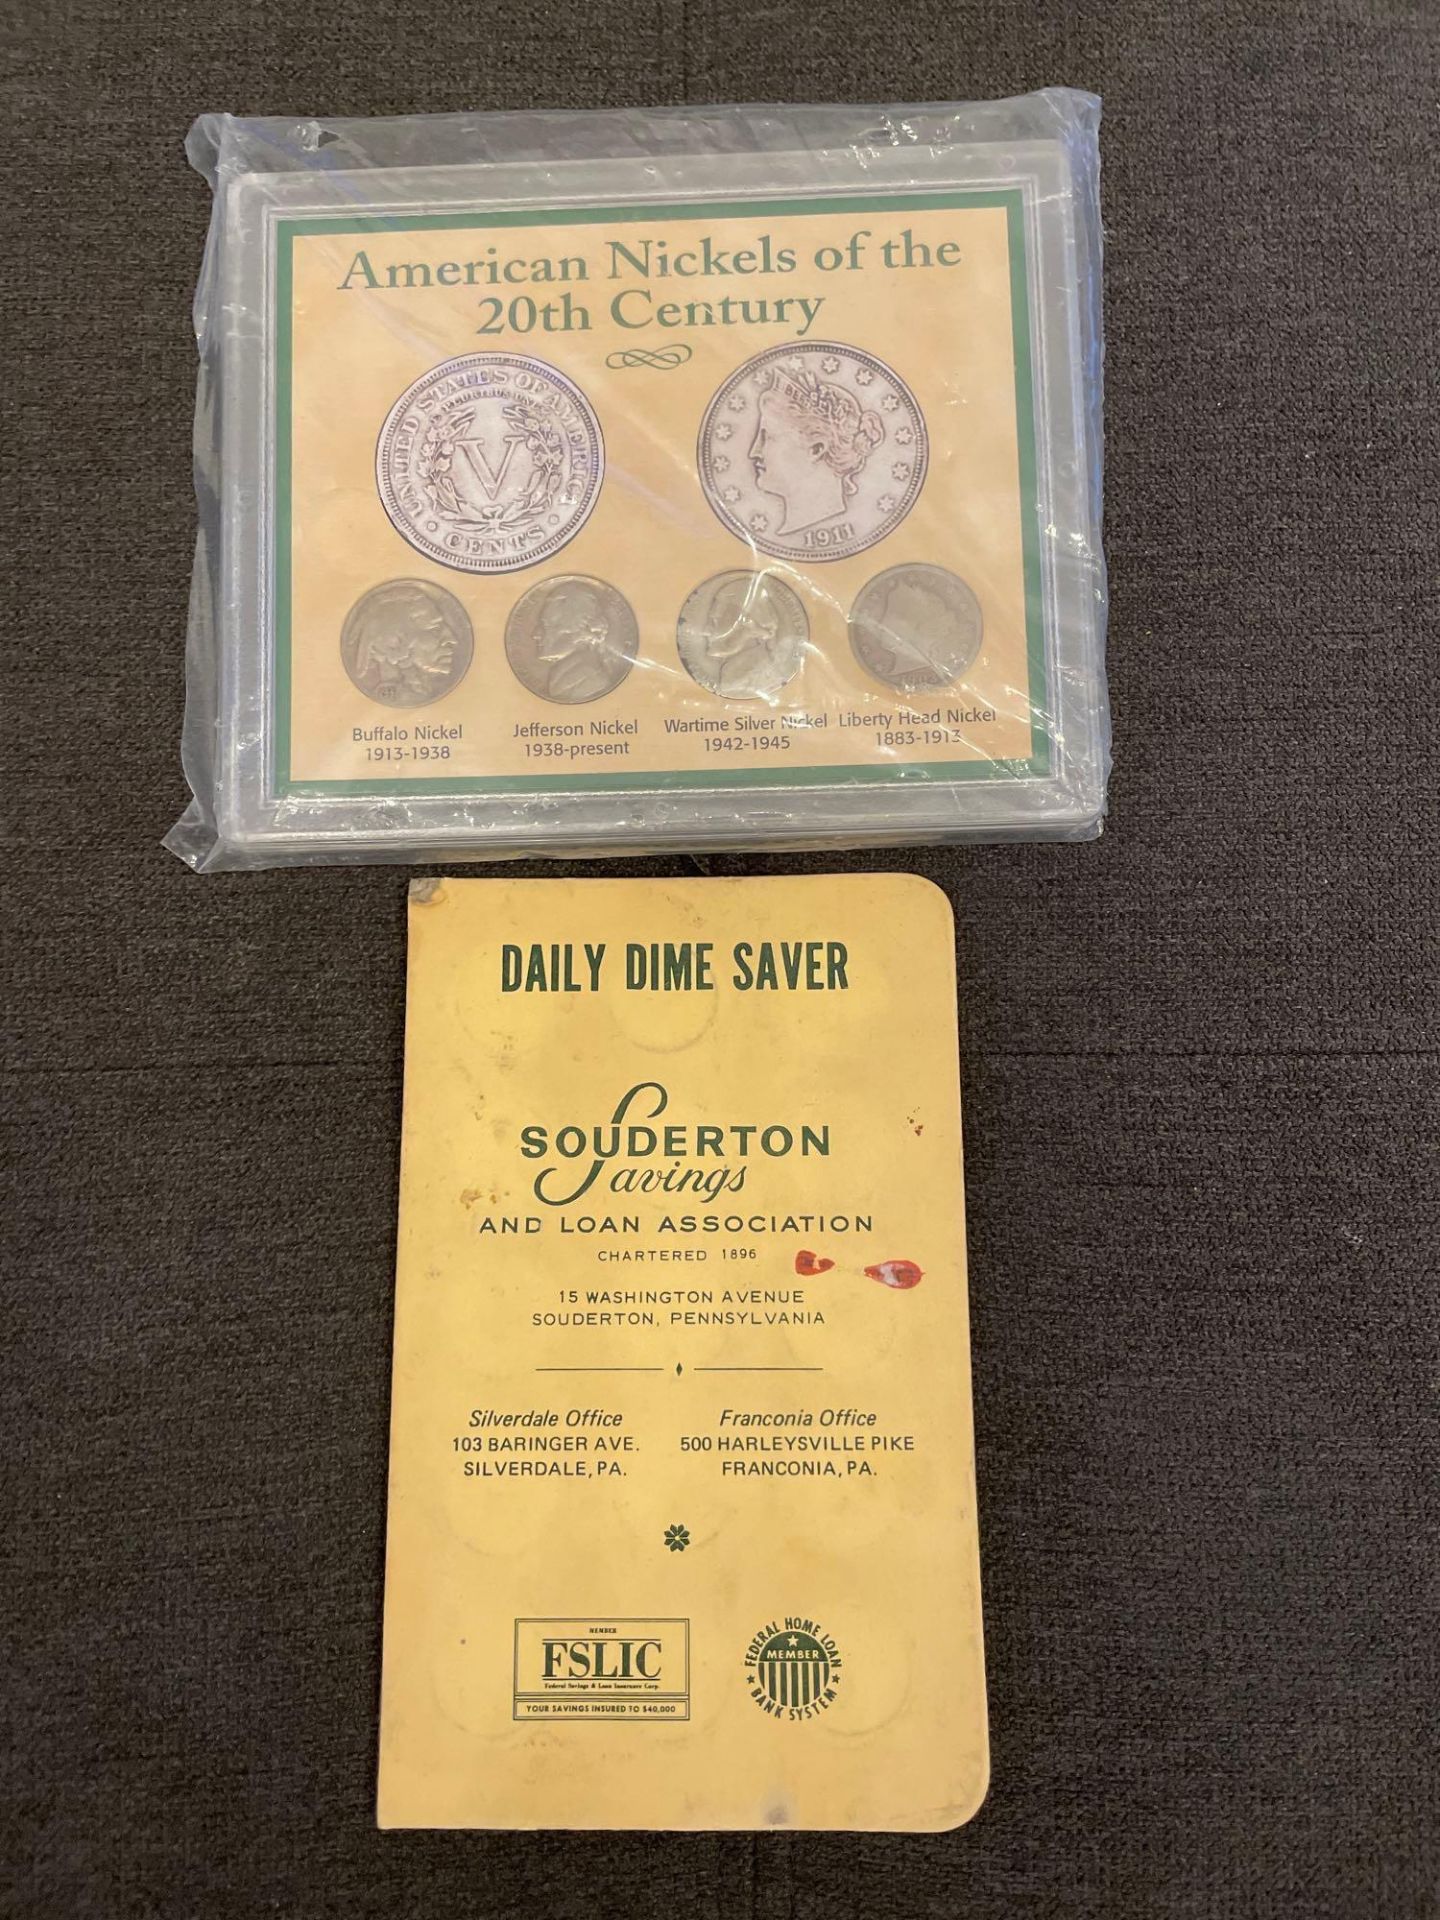 American Nickels of the 20th Century & Daily Dime Saver Souderton Savings book